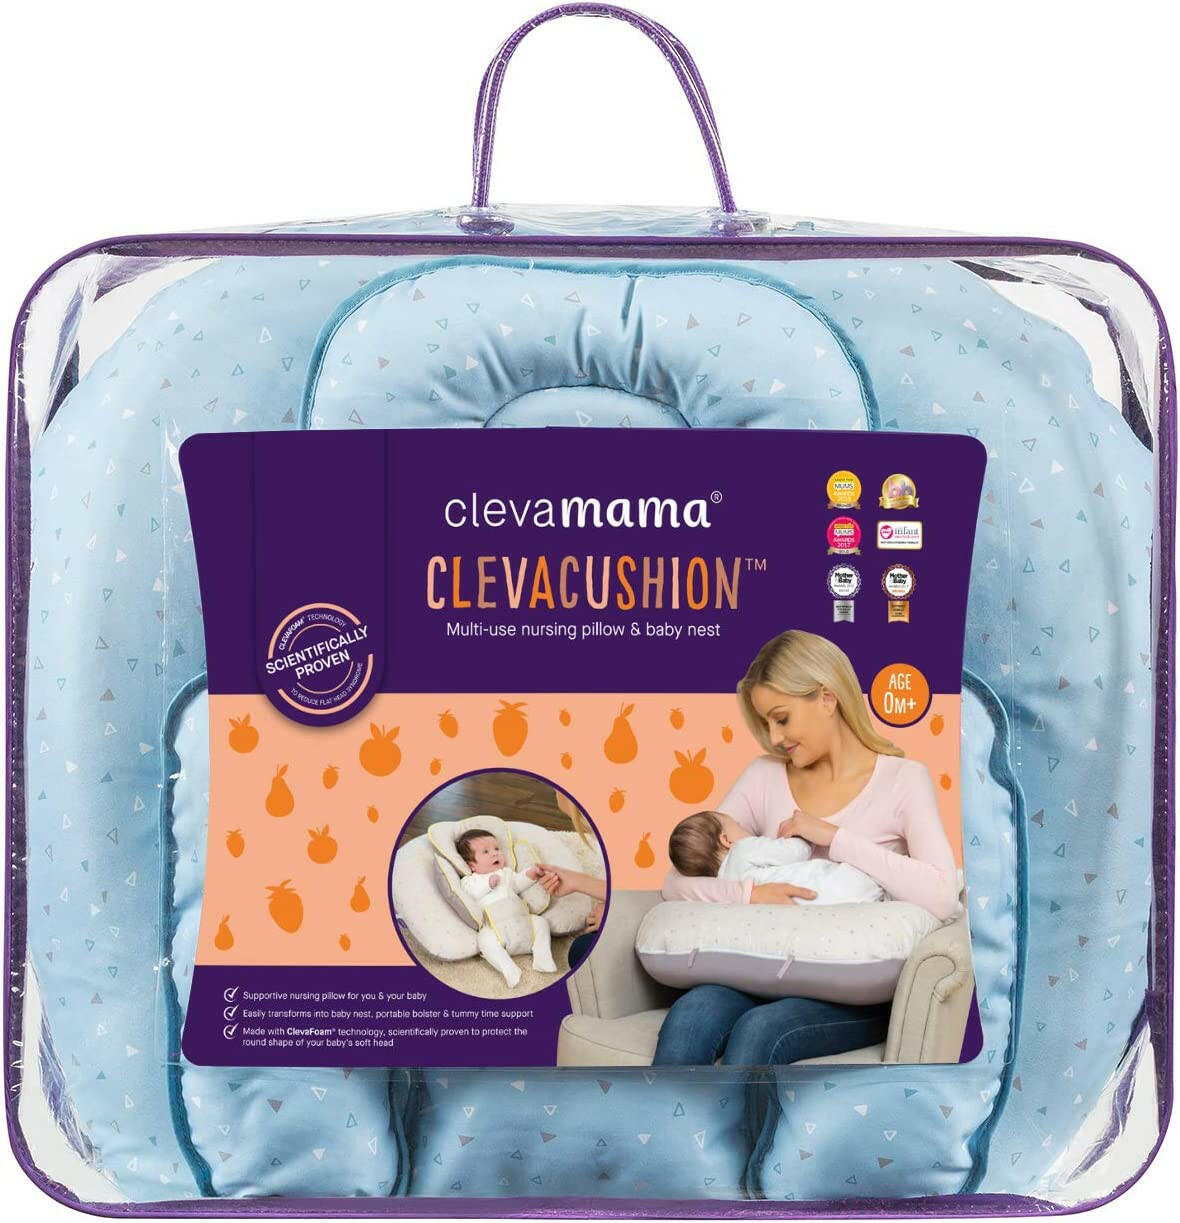 ClevaCushion Nursing Pillow & Baby Nest by Clevamama.